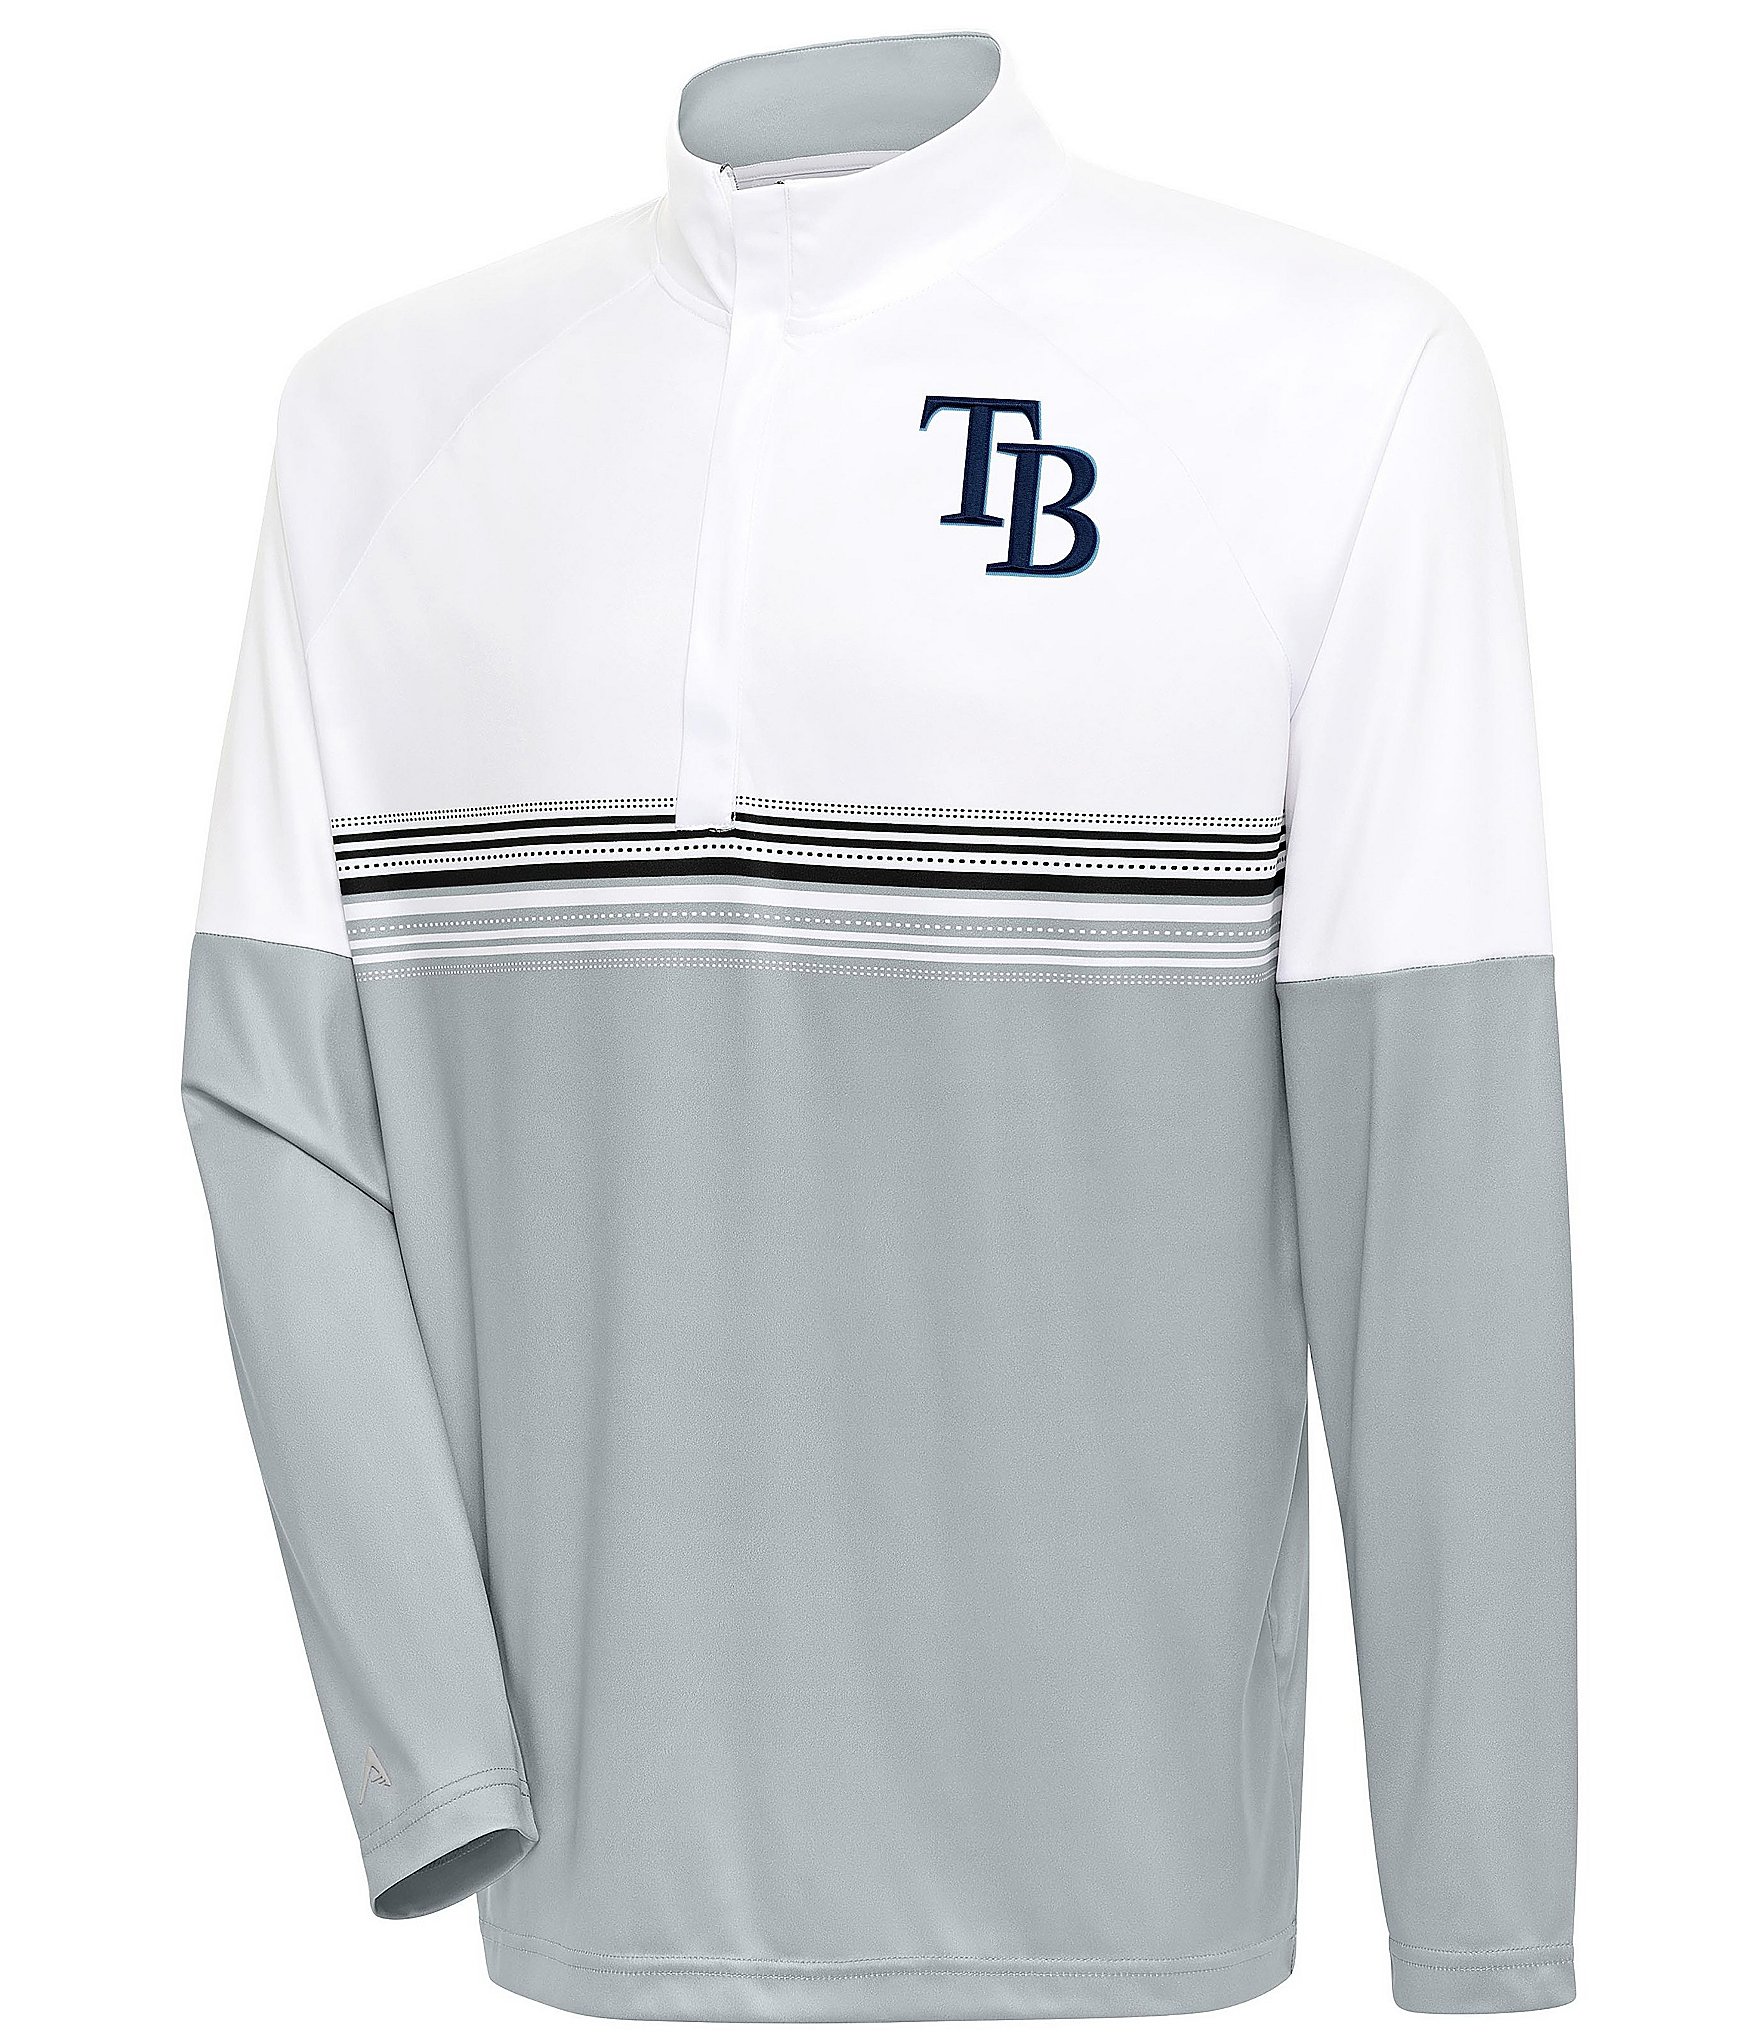 MLB Tampa Bay Rays Boys' White Pinstripe Pullover Jersey - S